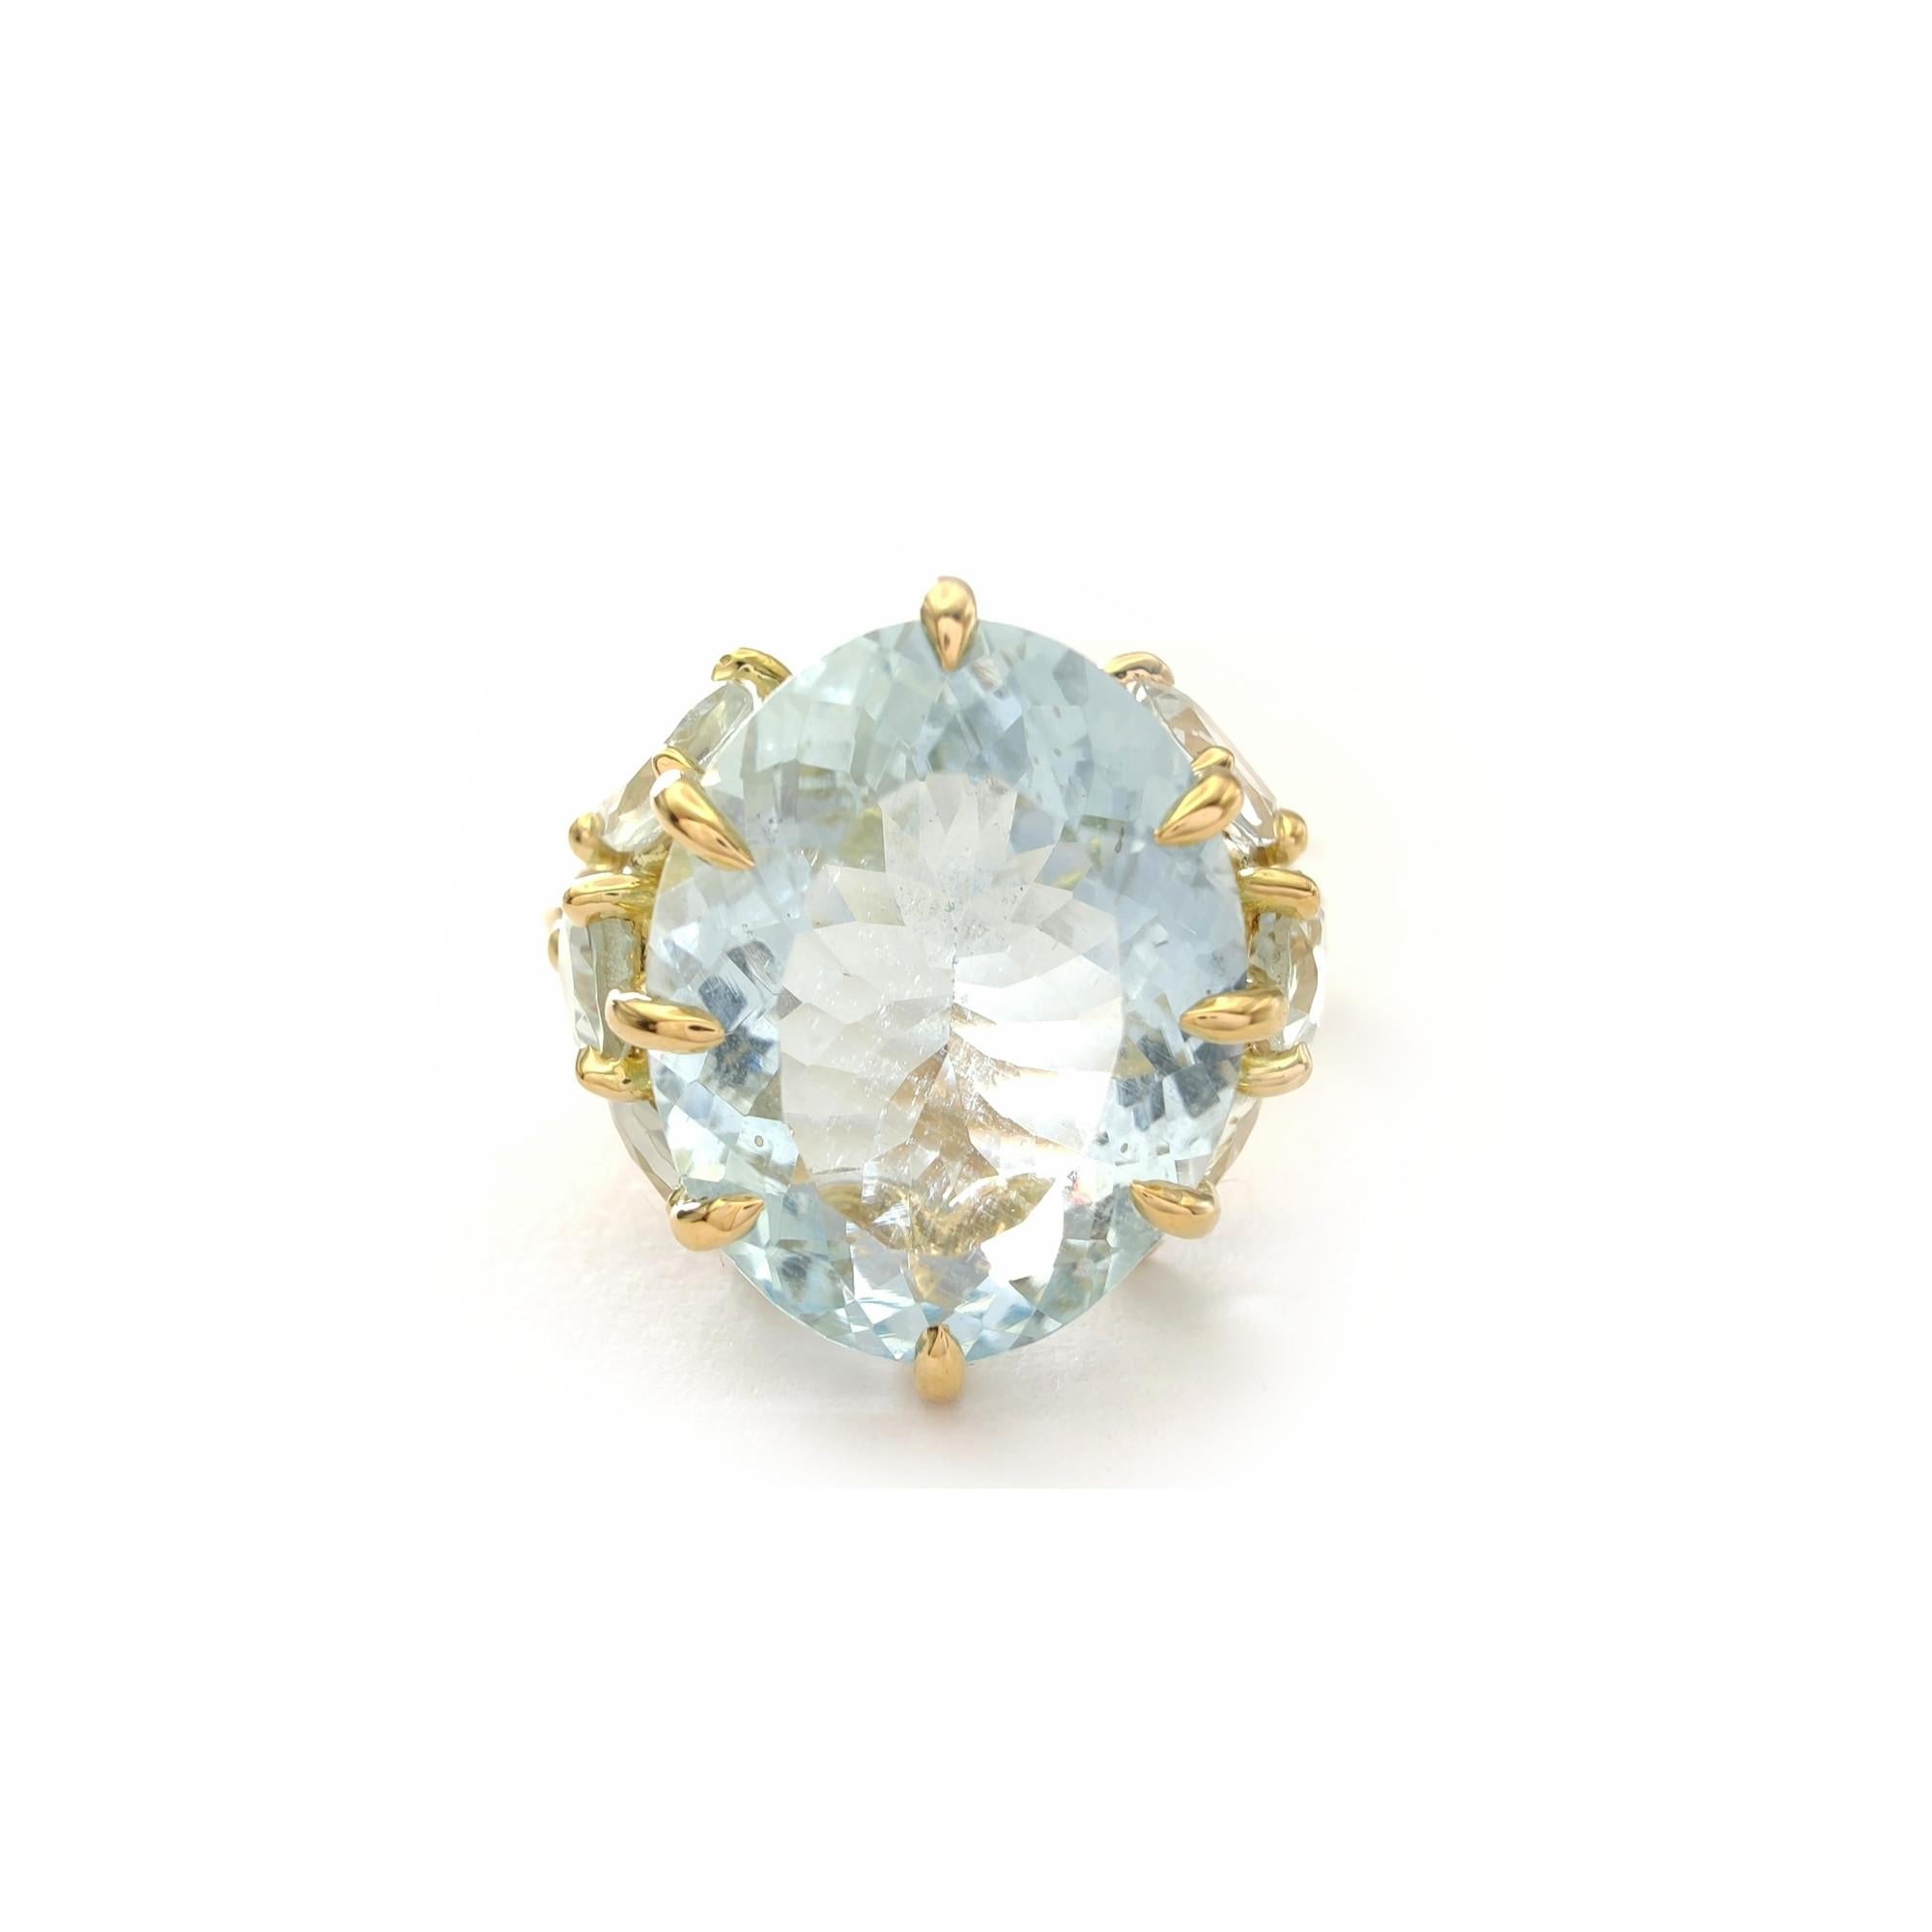 Women's Handmade 4.8 Carat Oval Aquamarine Cocktail Ring in 18K Yellow Gold For Sale